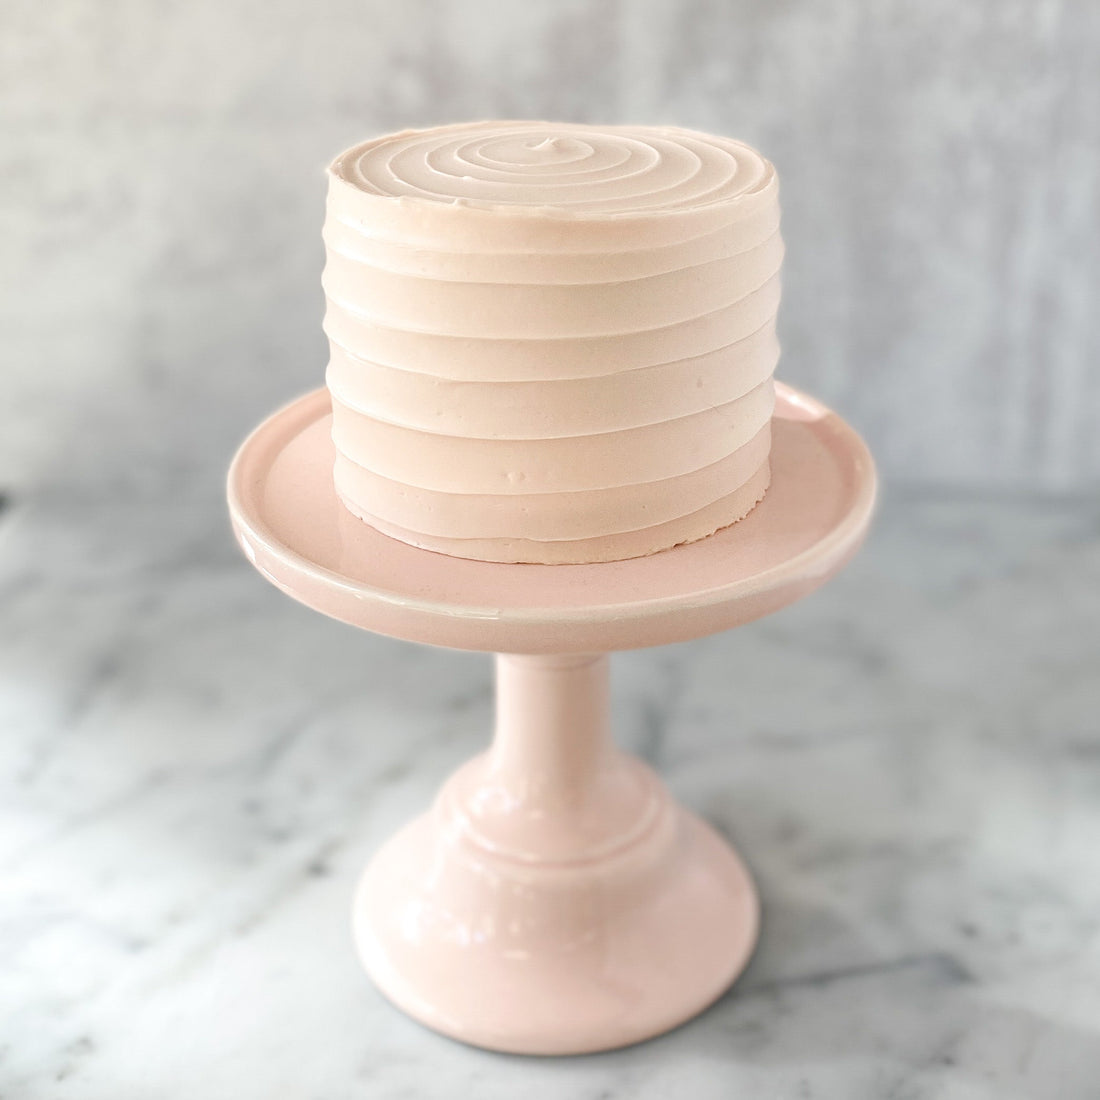 A round cake frosted in light pinked buttercream, which has been applied in a spiral pattern top to bottom.